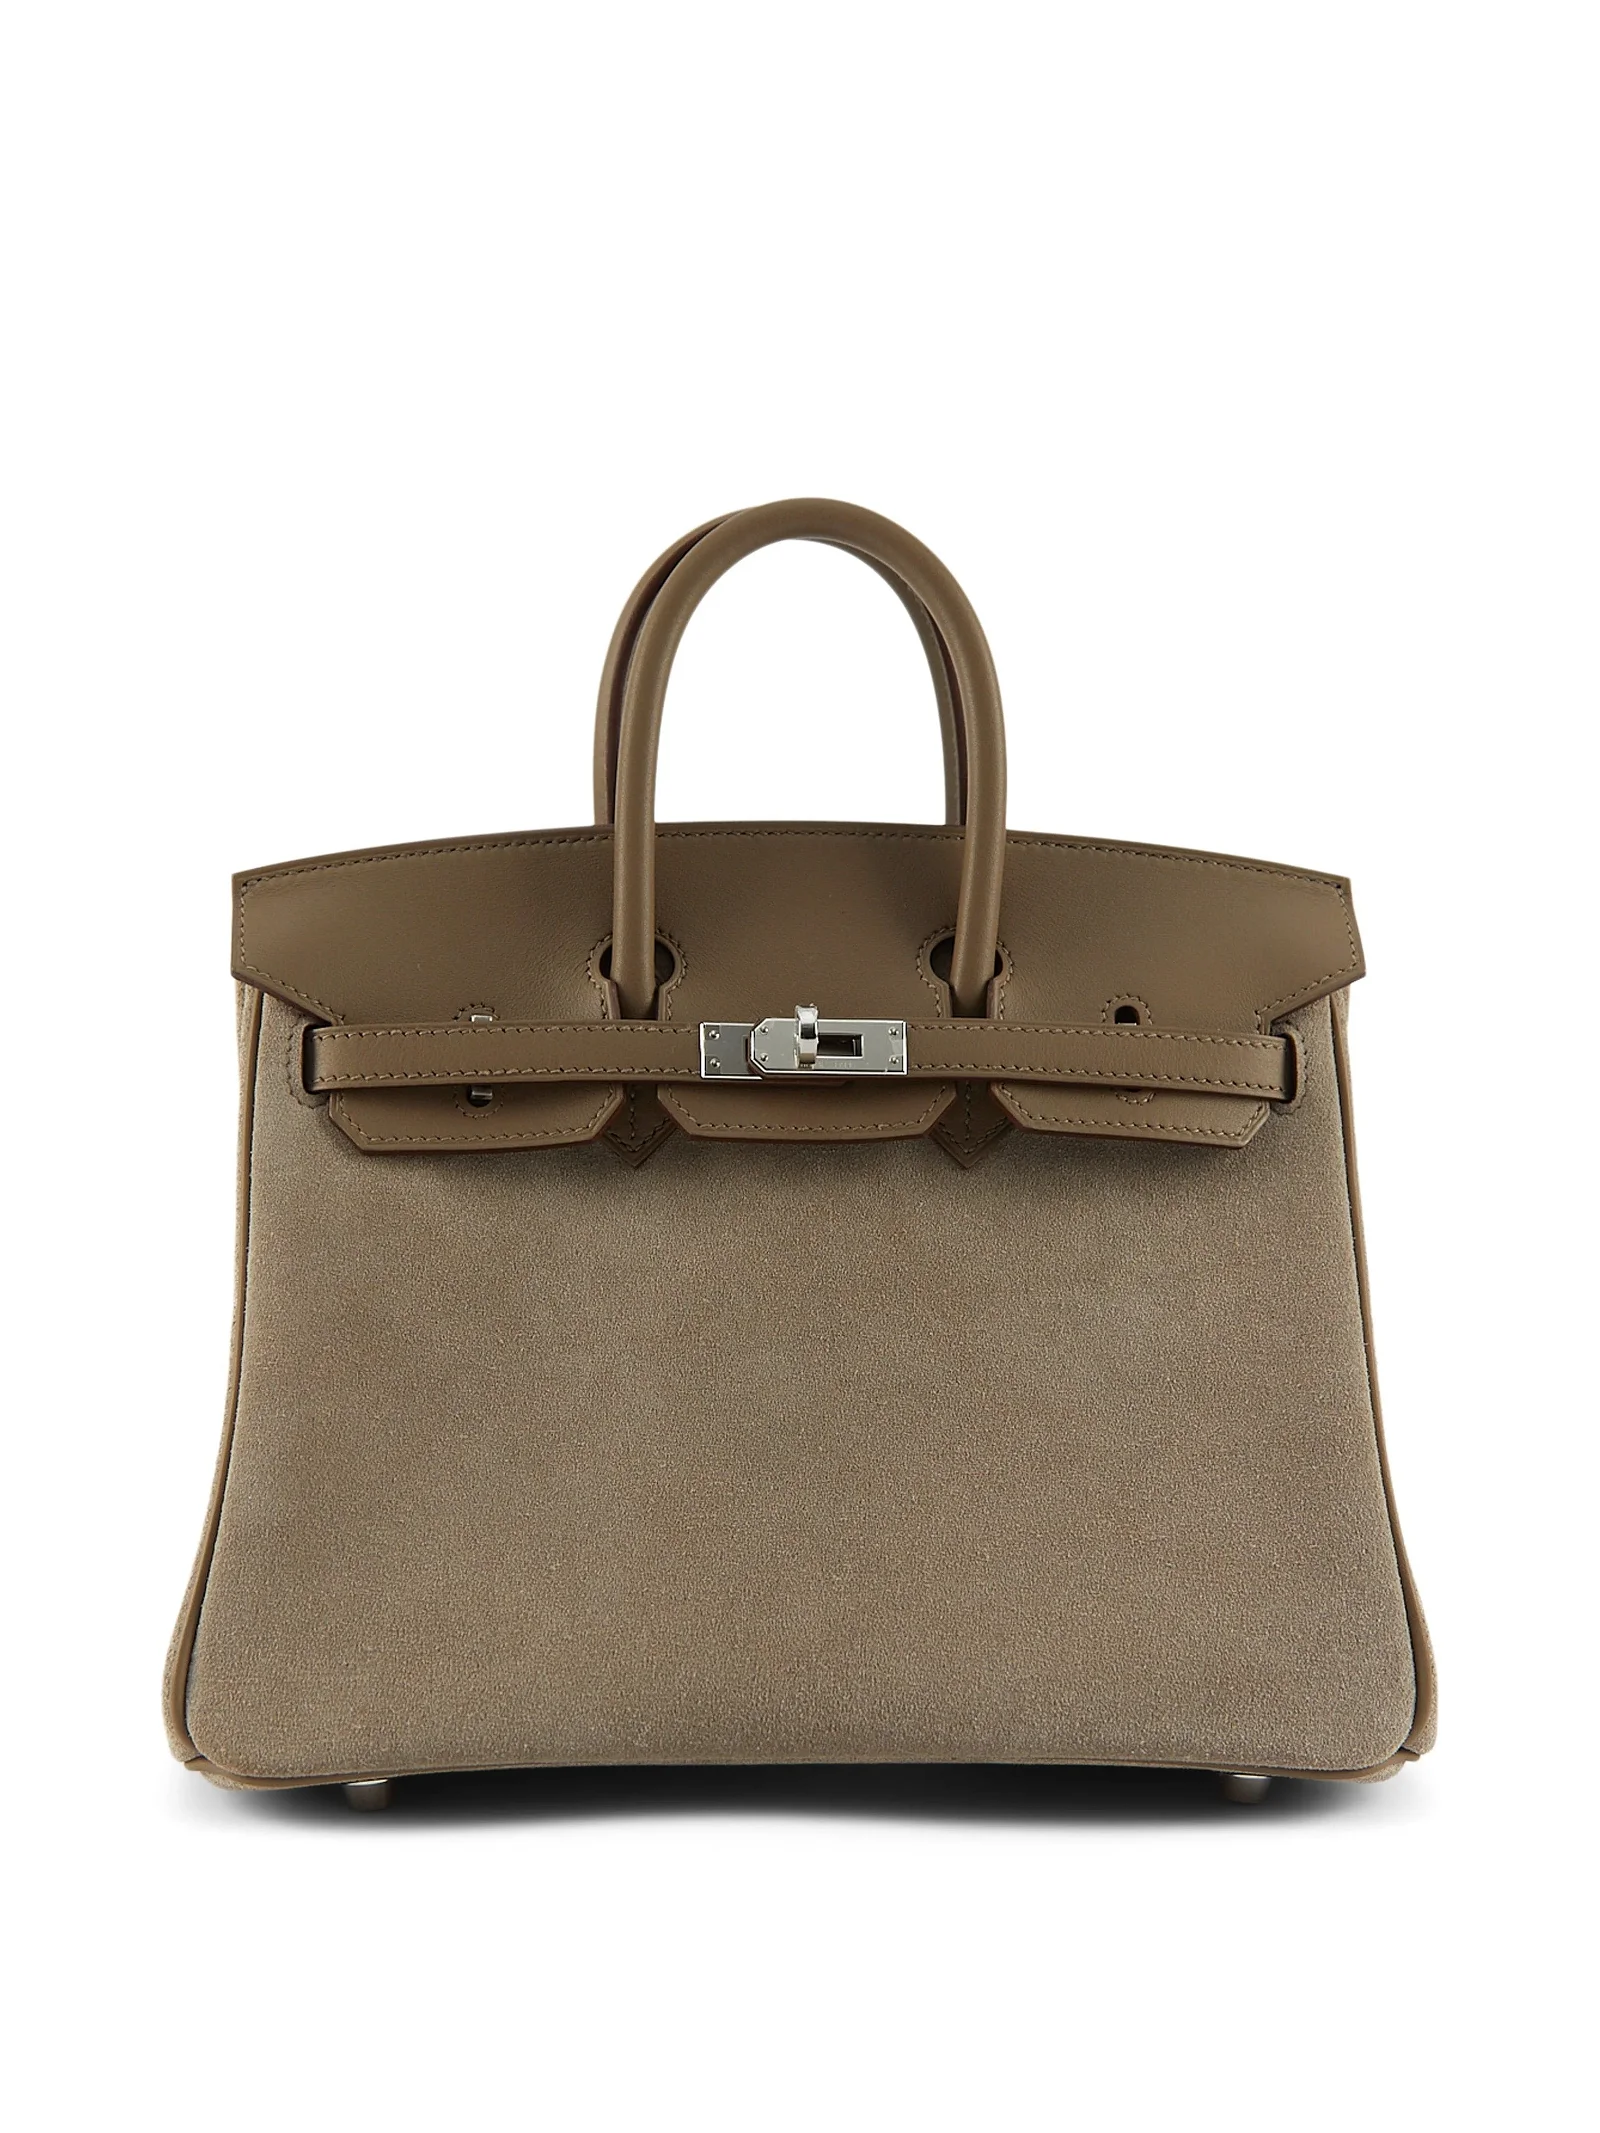 Image of HERMÈS BIRKIN 25CM GRIZZLY GRIS CAILLOU & ETOUPE Suede Doblis & Swift Leather with Palladium Hardware